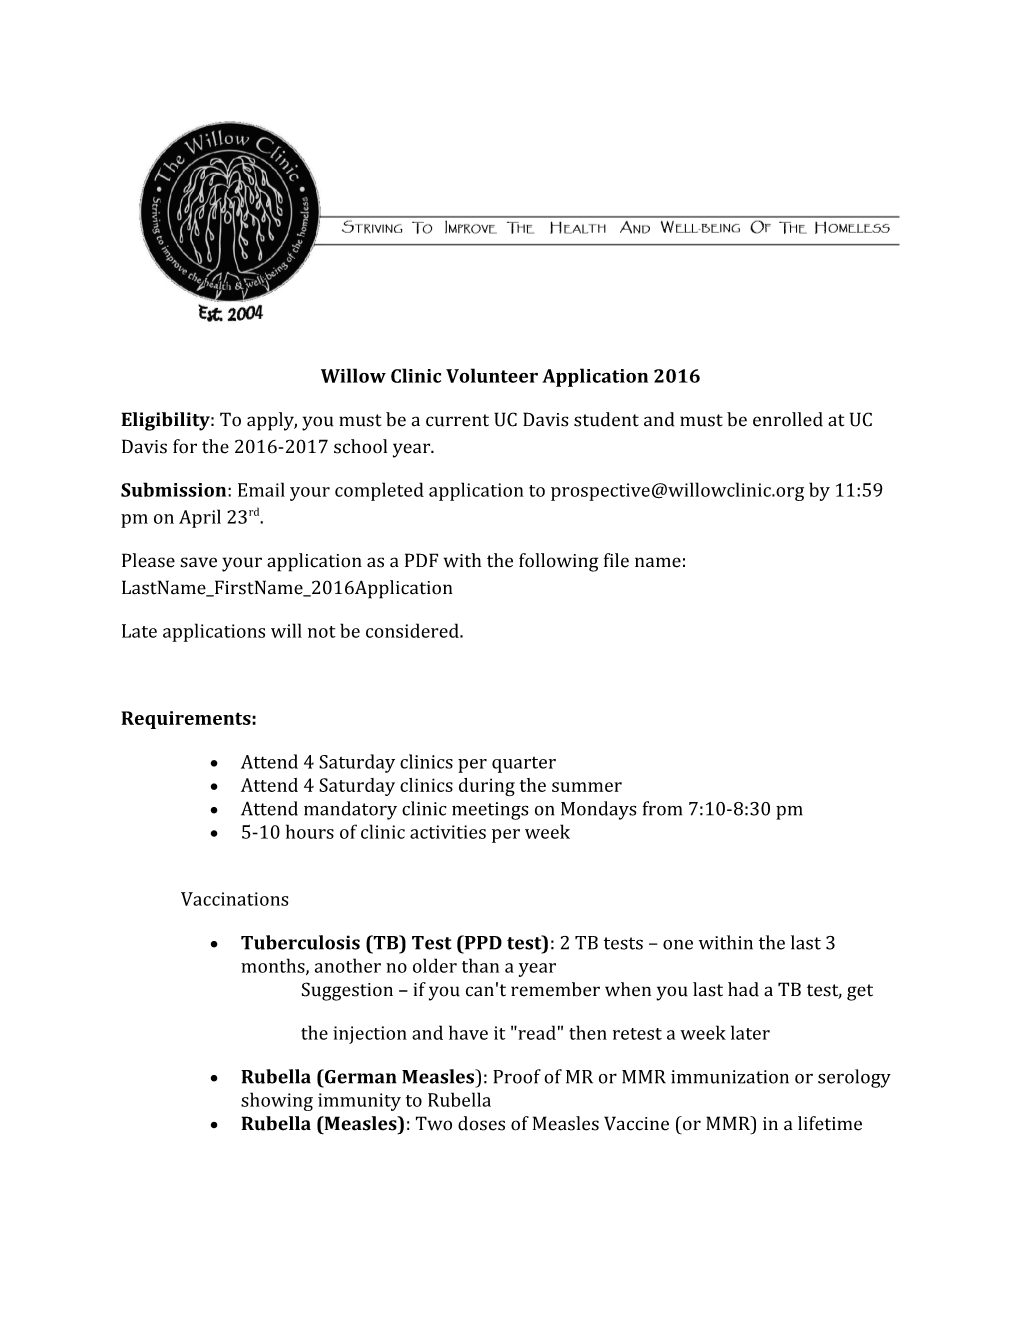 Willow Clinic Volunteer Application2016